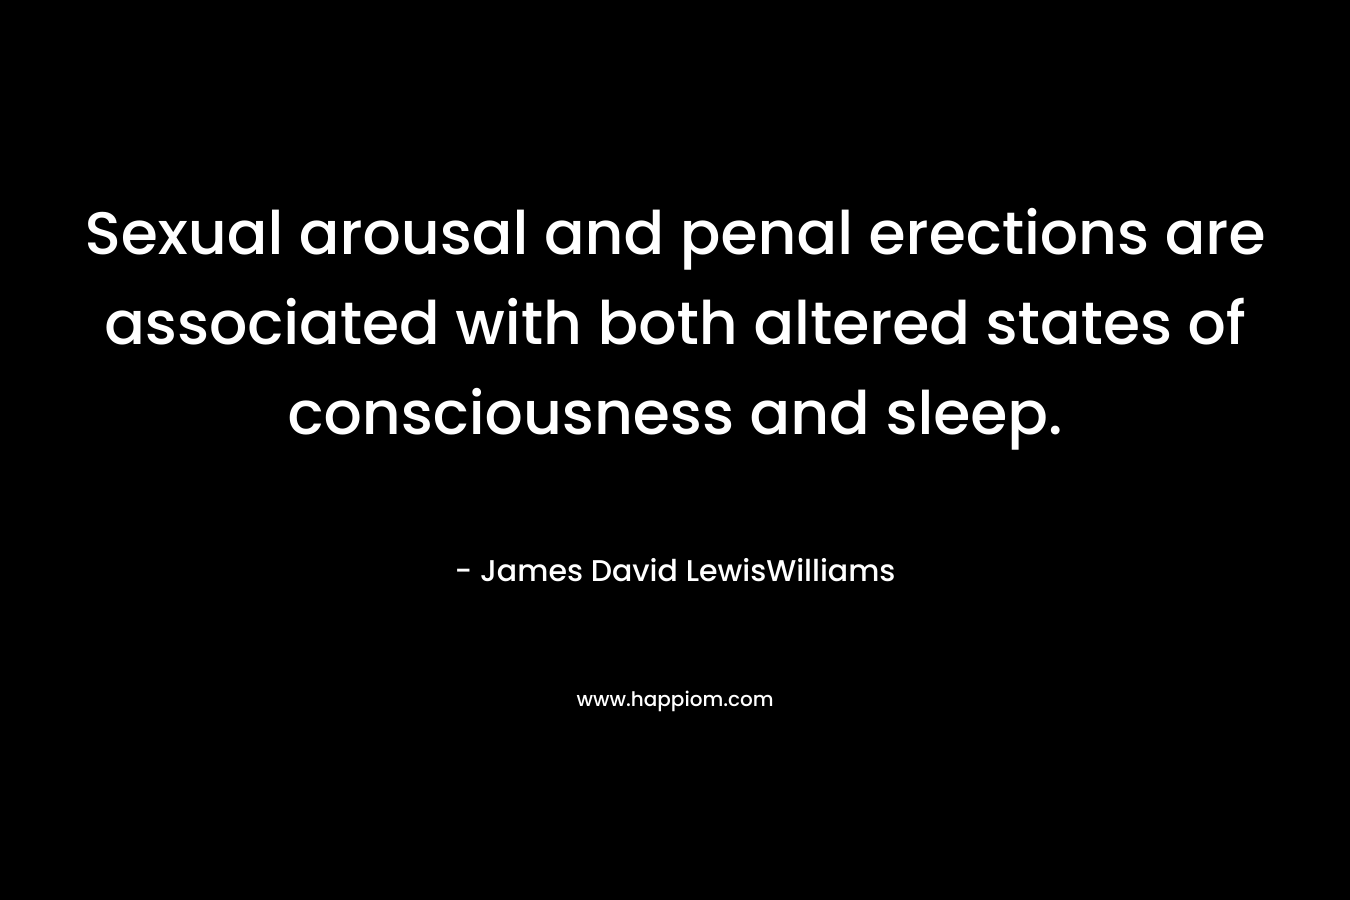 Sexual arousal and penal erections are associated with both altered states of consciousness and sleep.